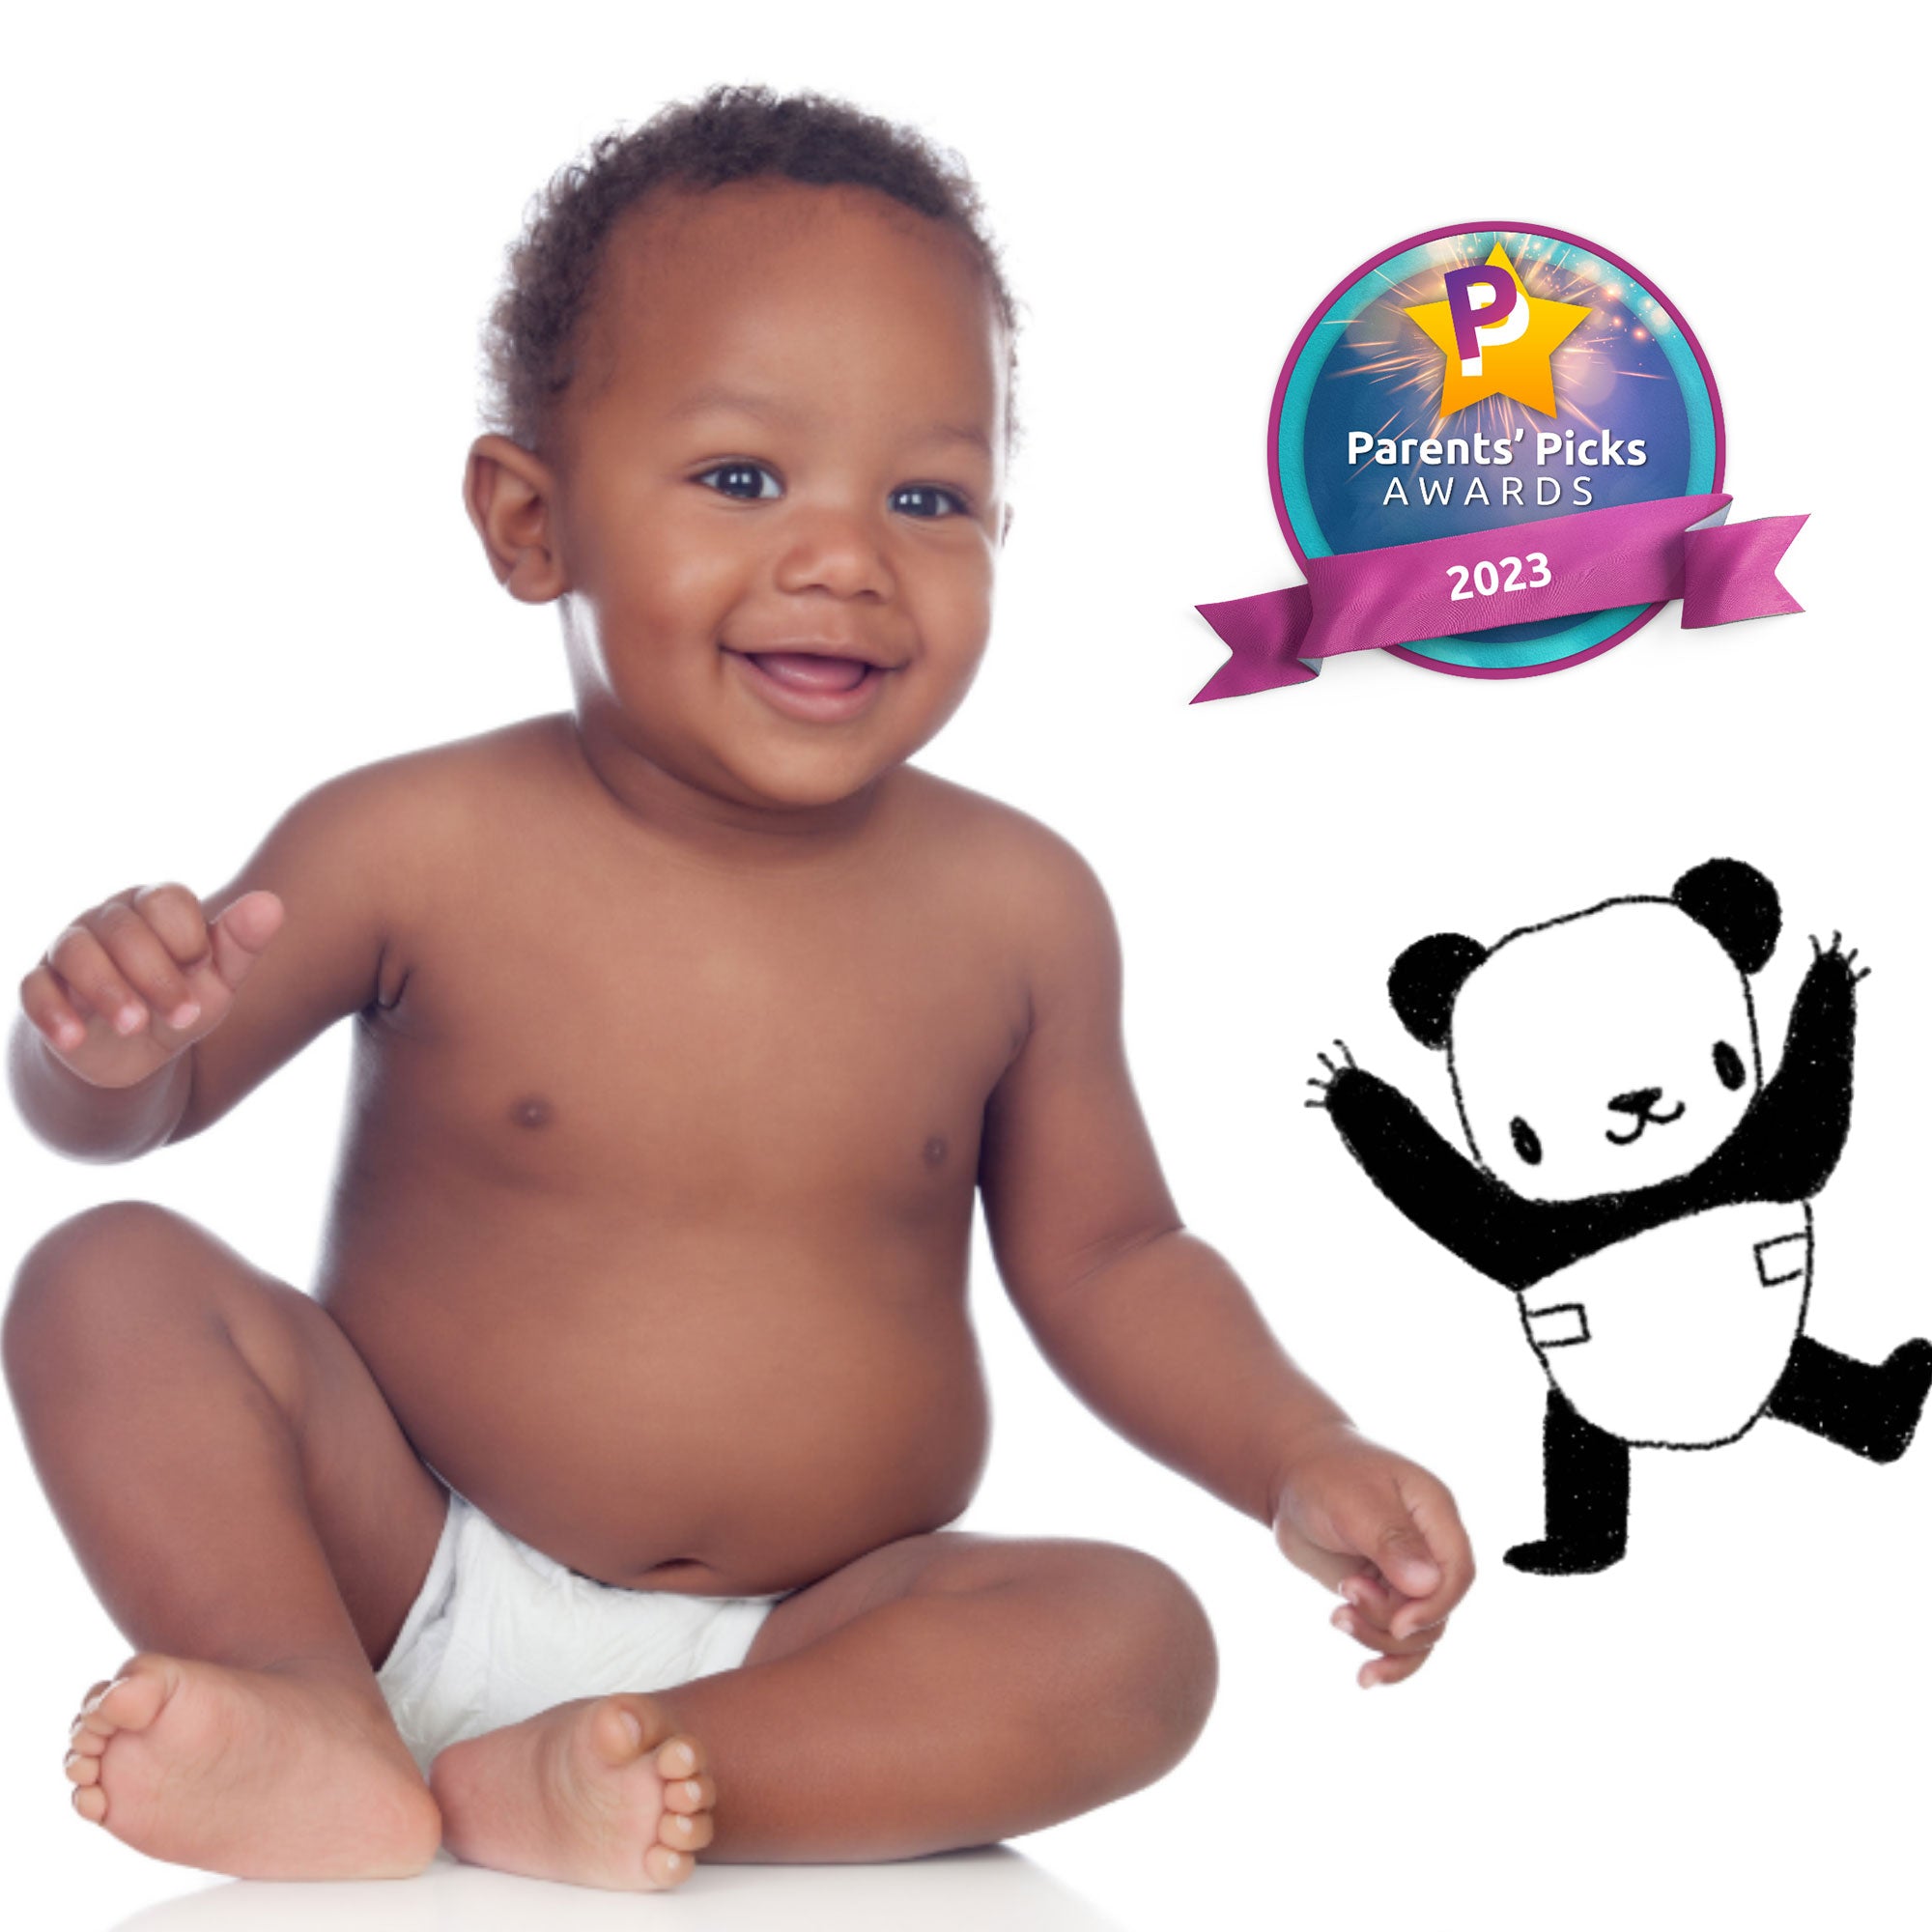 Clear Dry Natural Disposable Diaper Pants